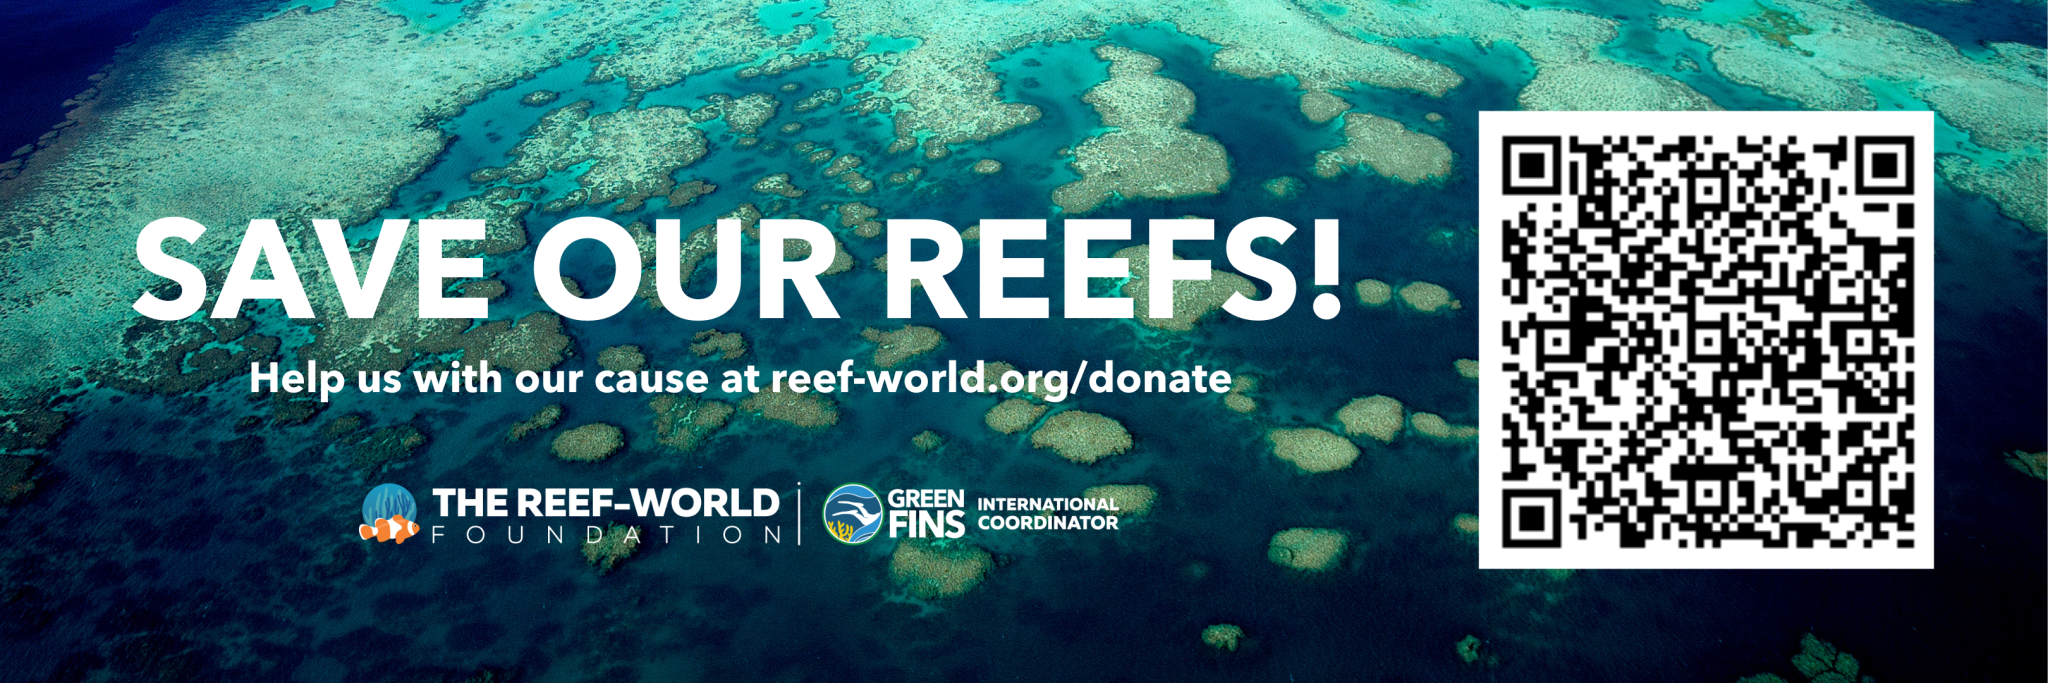 save our reefs